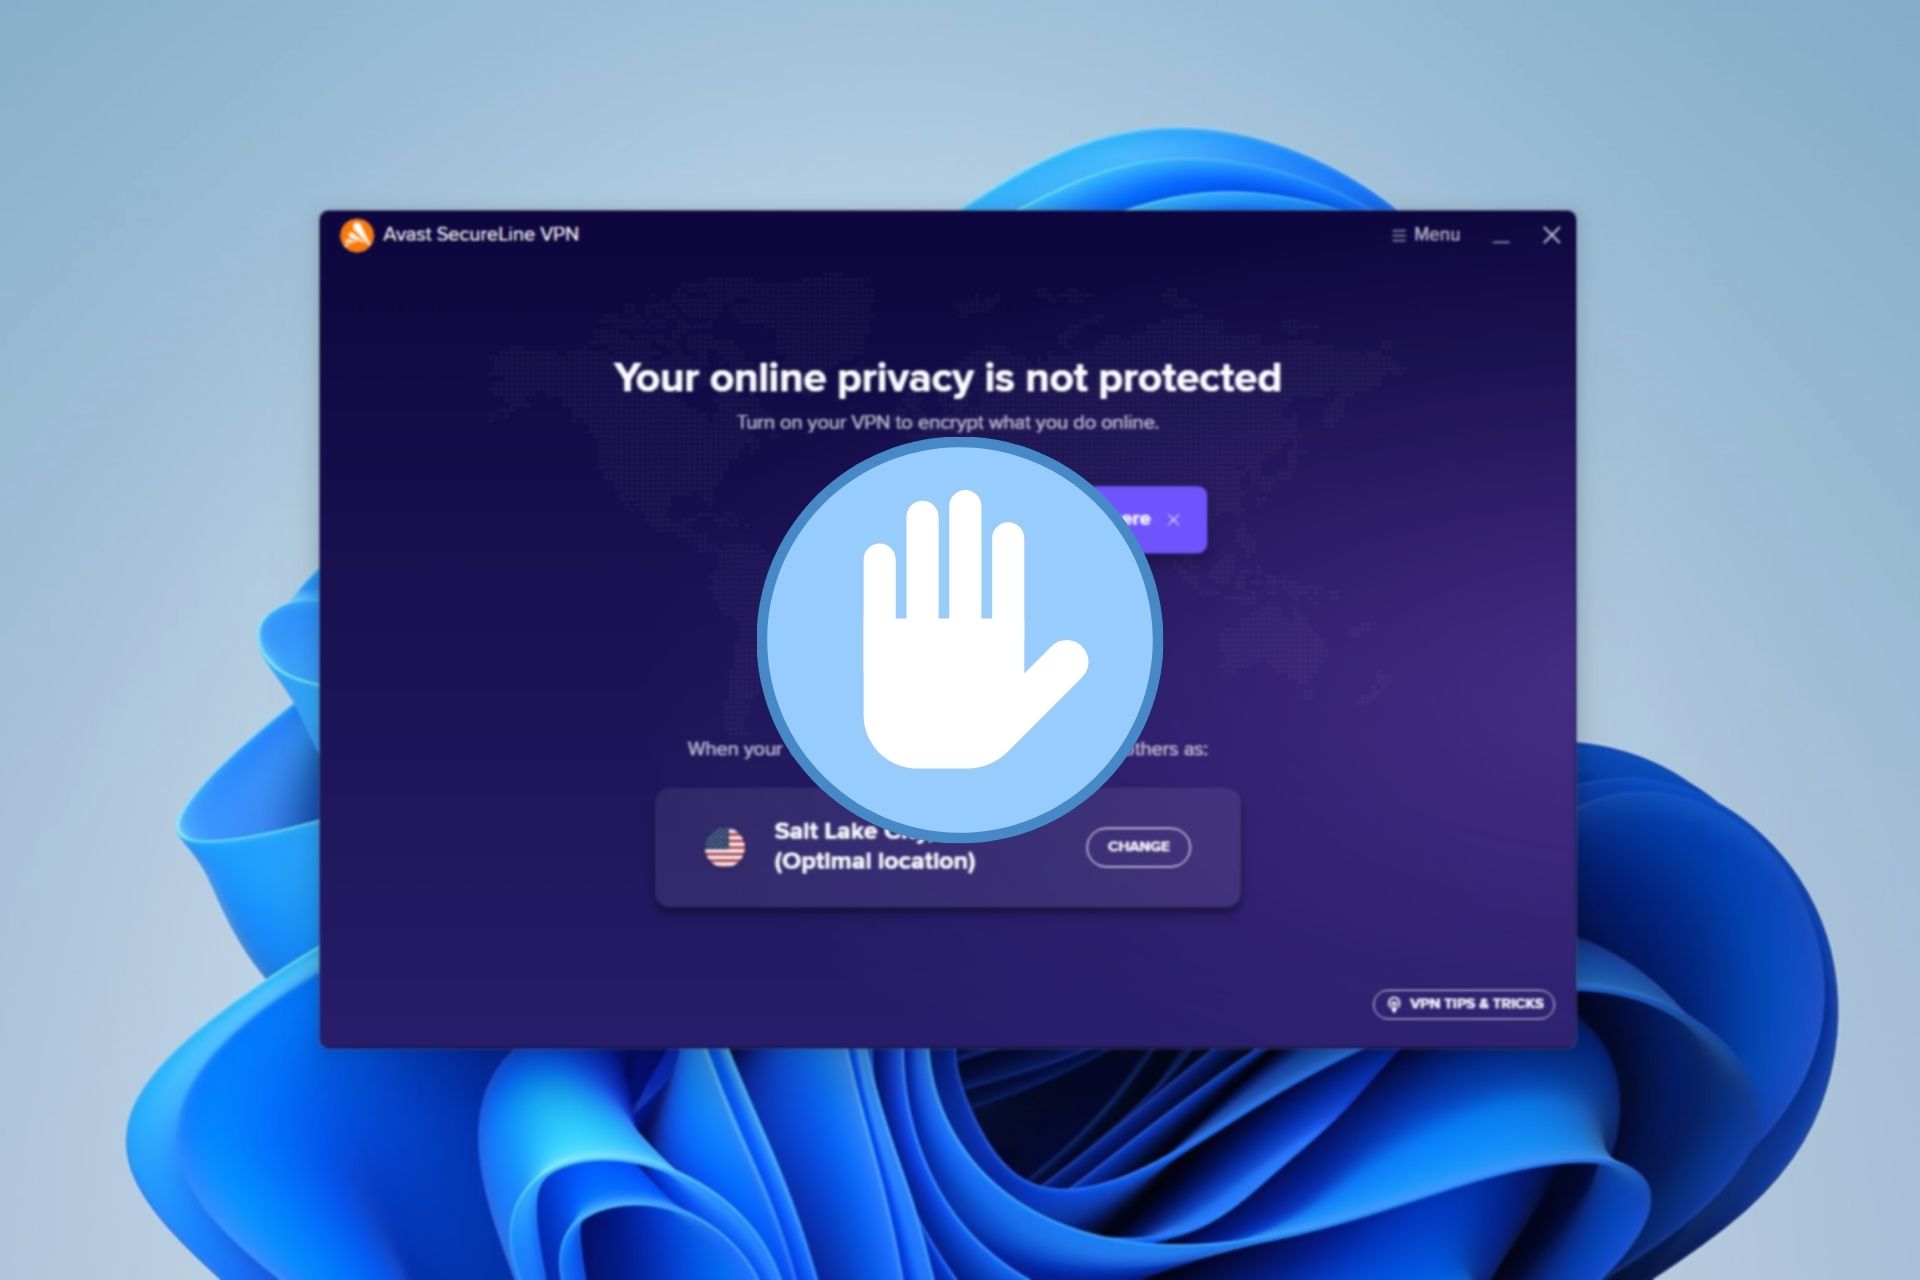 how to fix avast secureline vpn max connection reached error